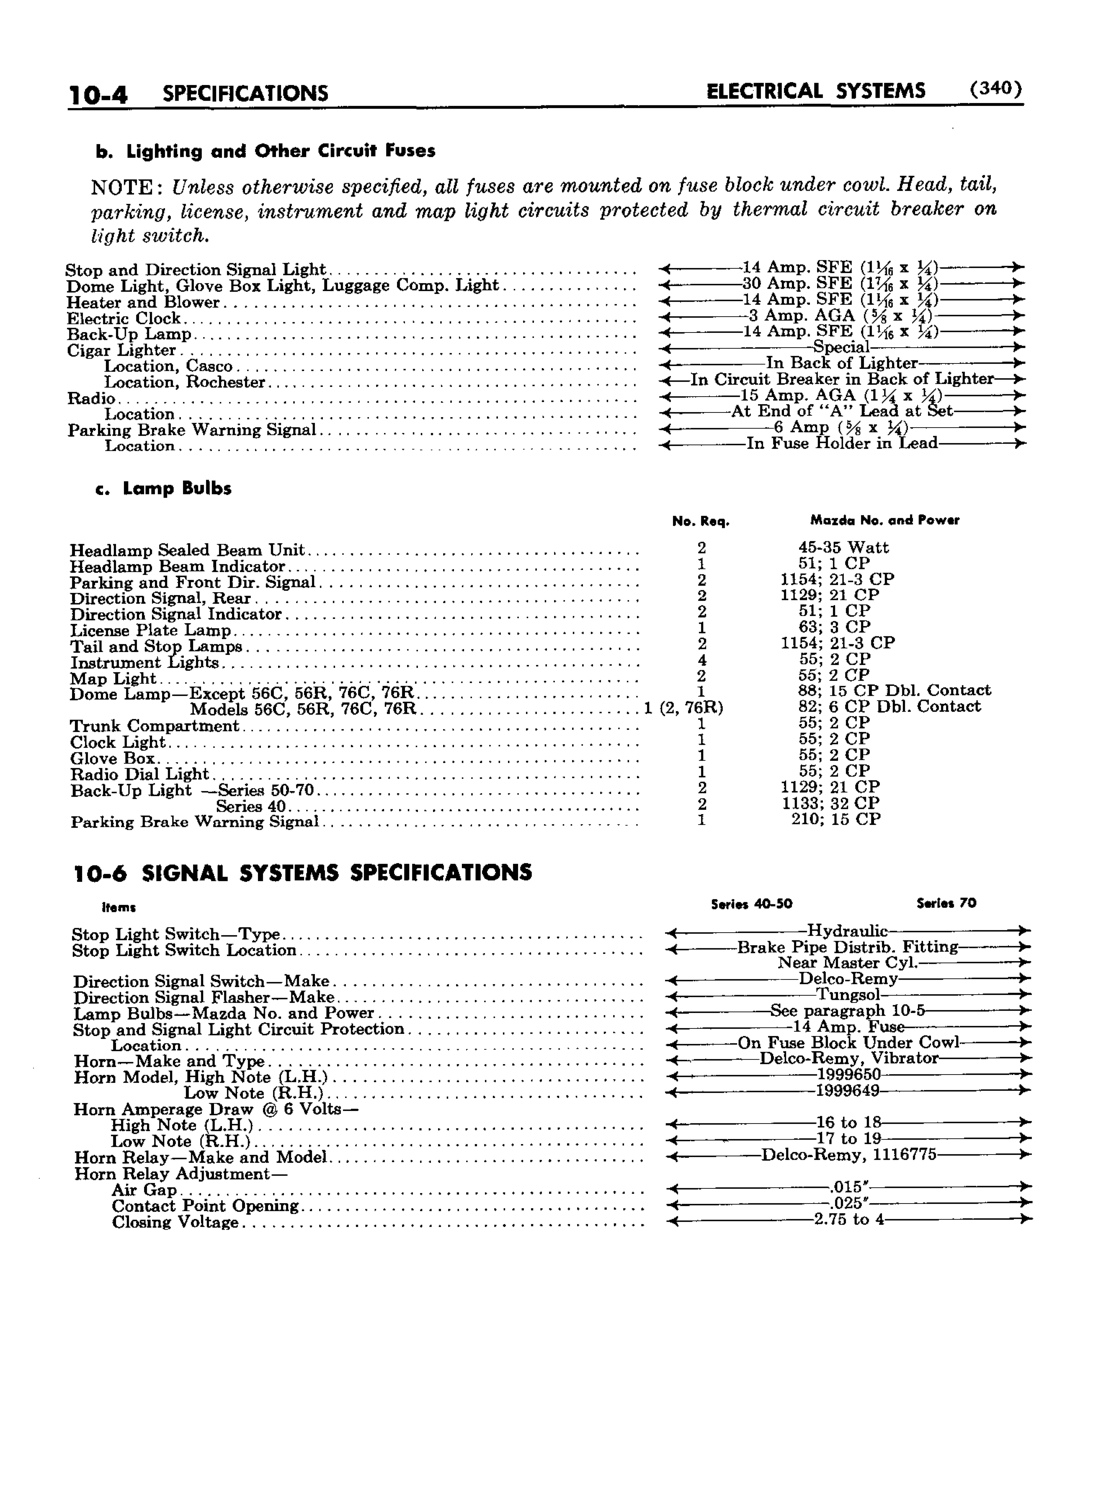 n_11 1952 Buick Shop Manual - Electrical Systems-004-004.jpg